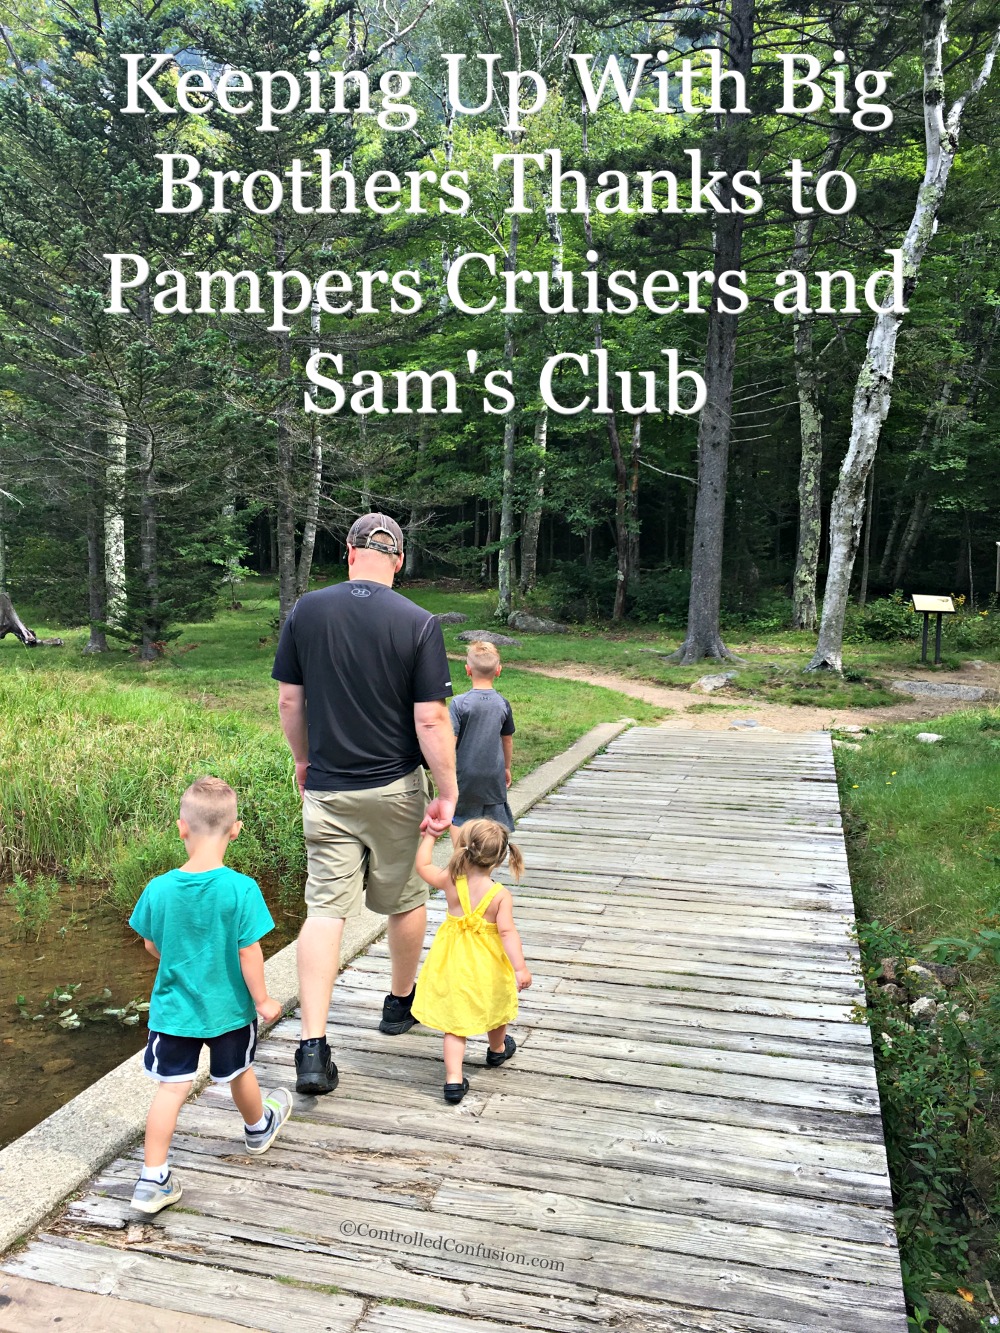 Keeping Up With Big Brothers Thanks to Pampers Cruisers and Sam’s Club